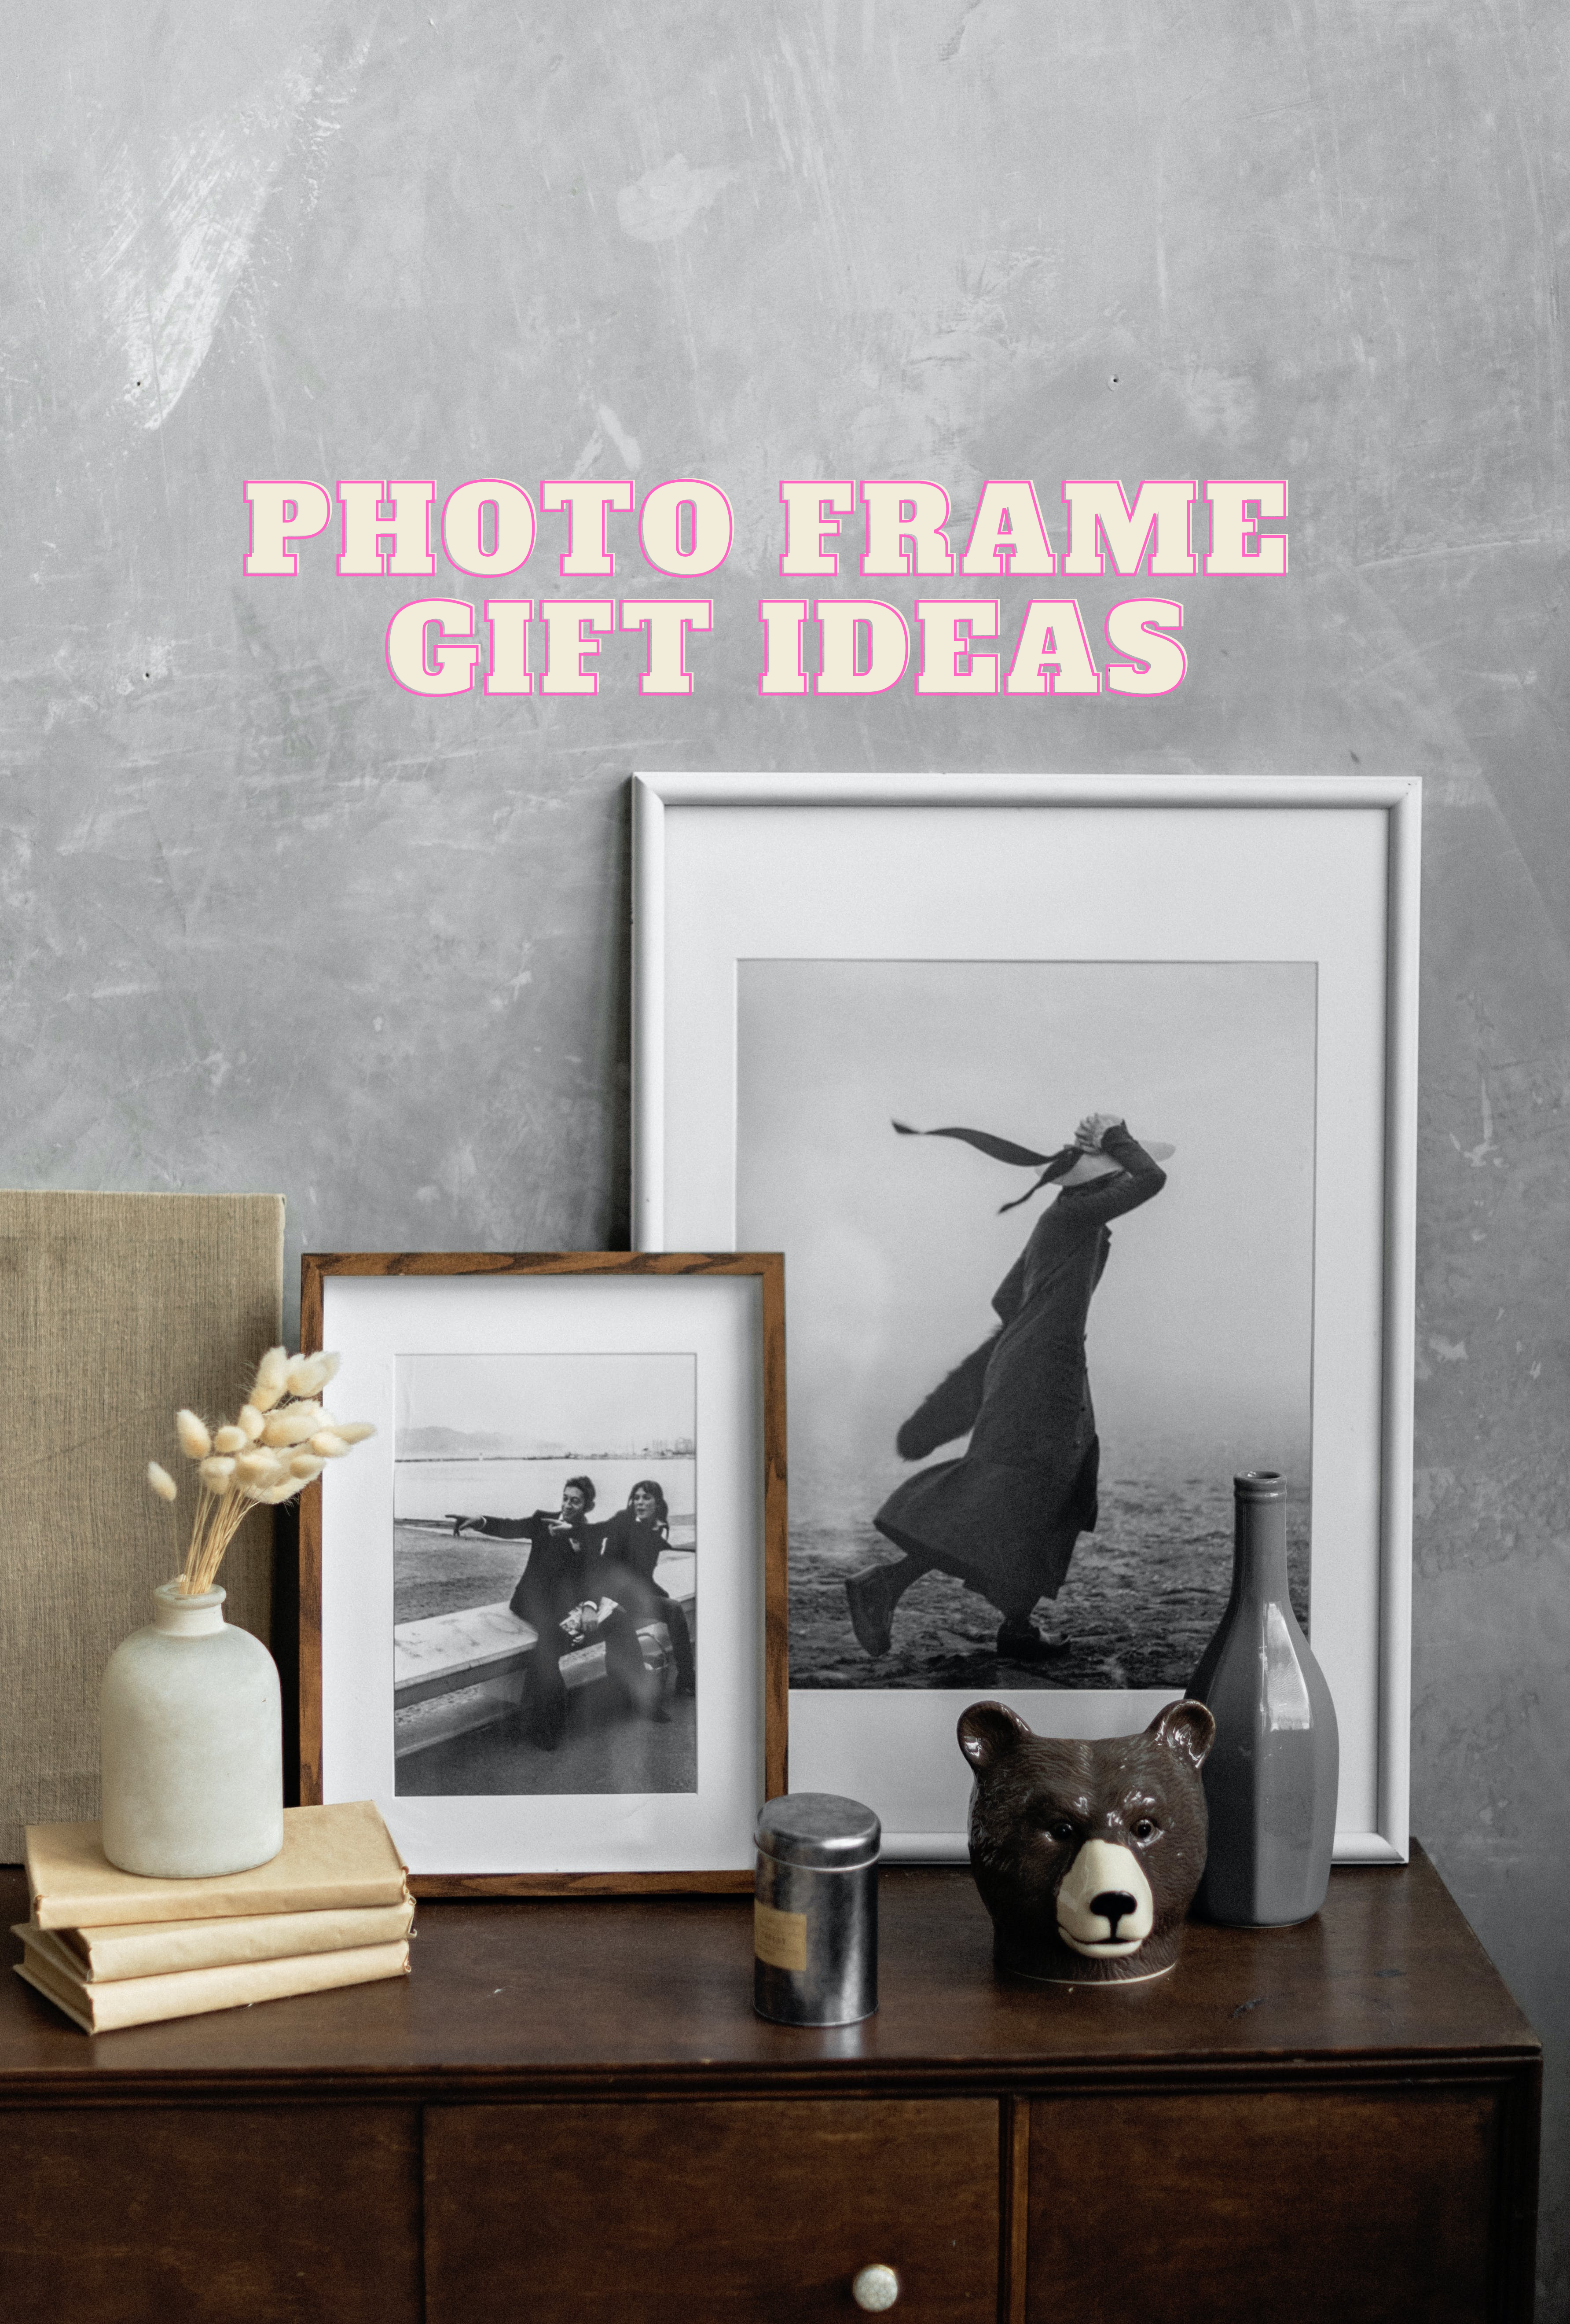 Creative Photo Frame Gift Ideas for Any Occasion